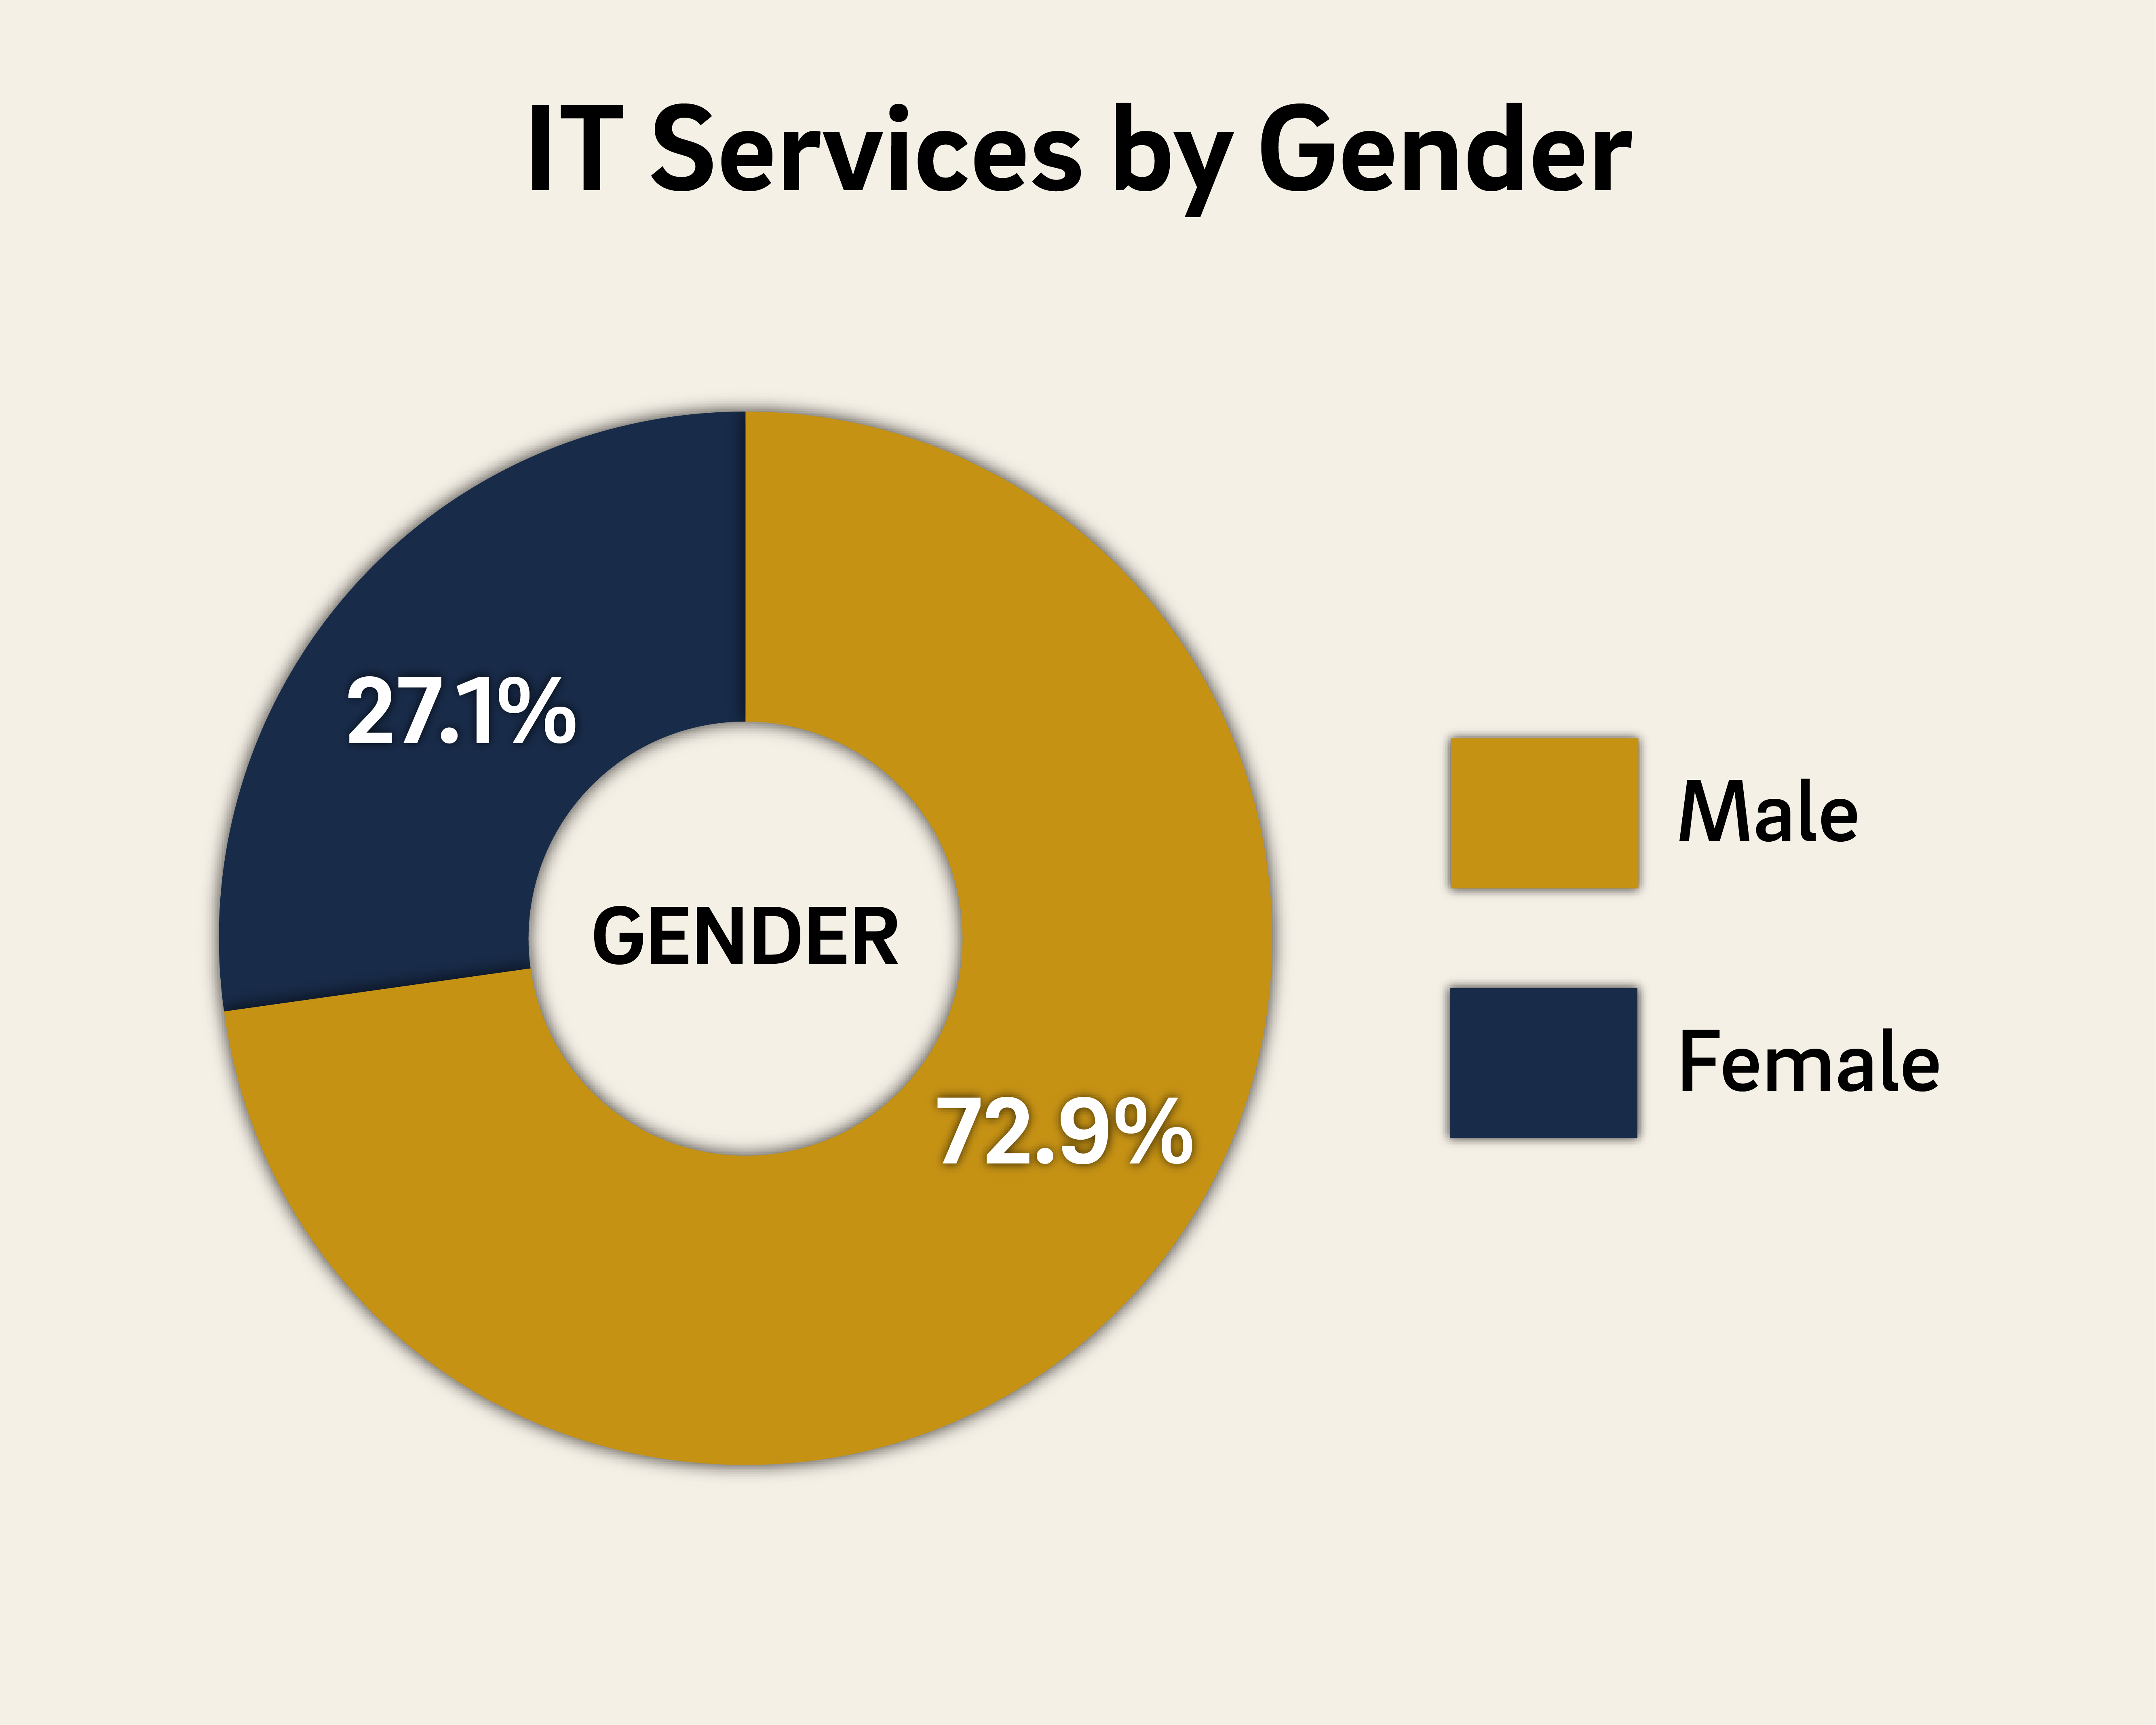 Gender Distribution is 73% male and 27% female